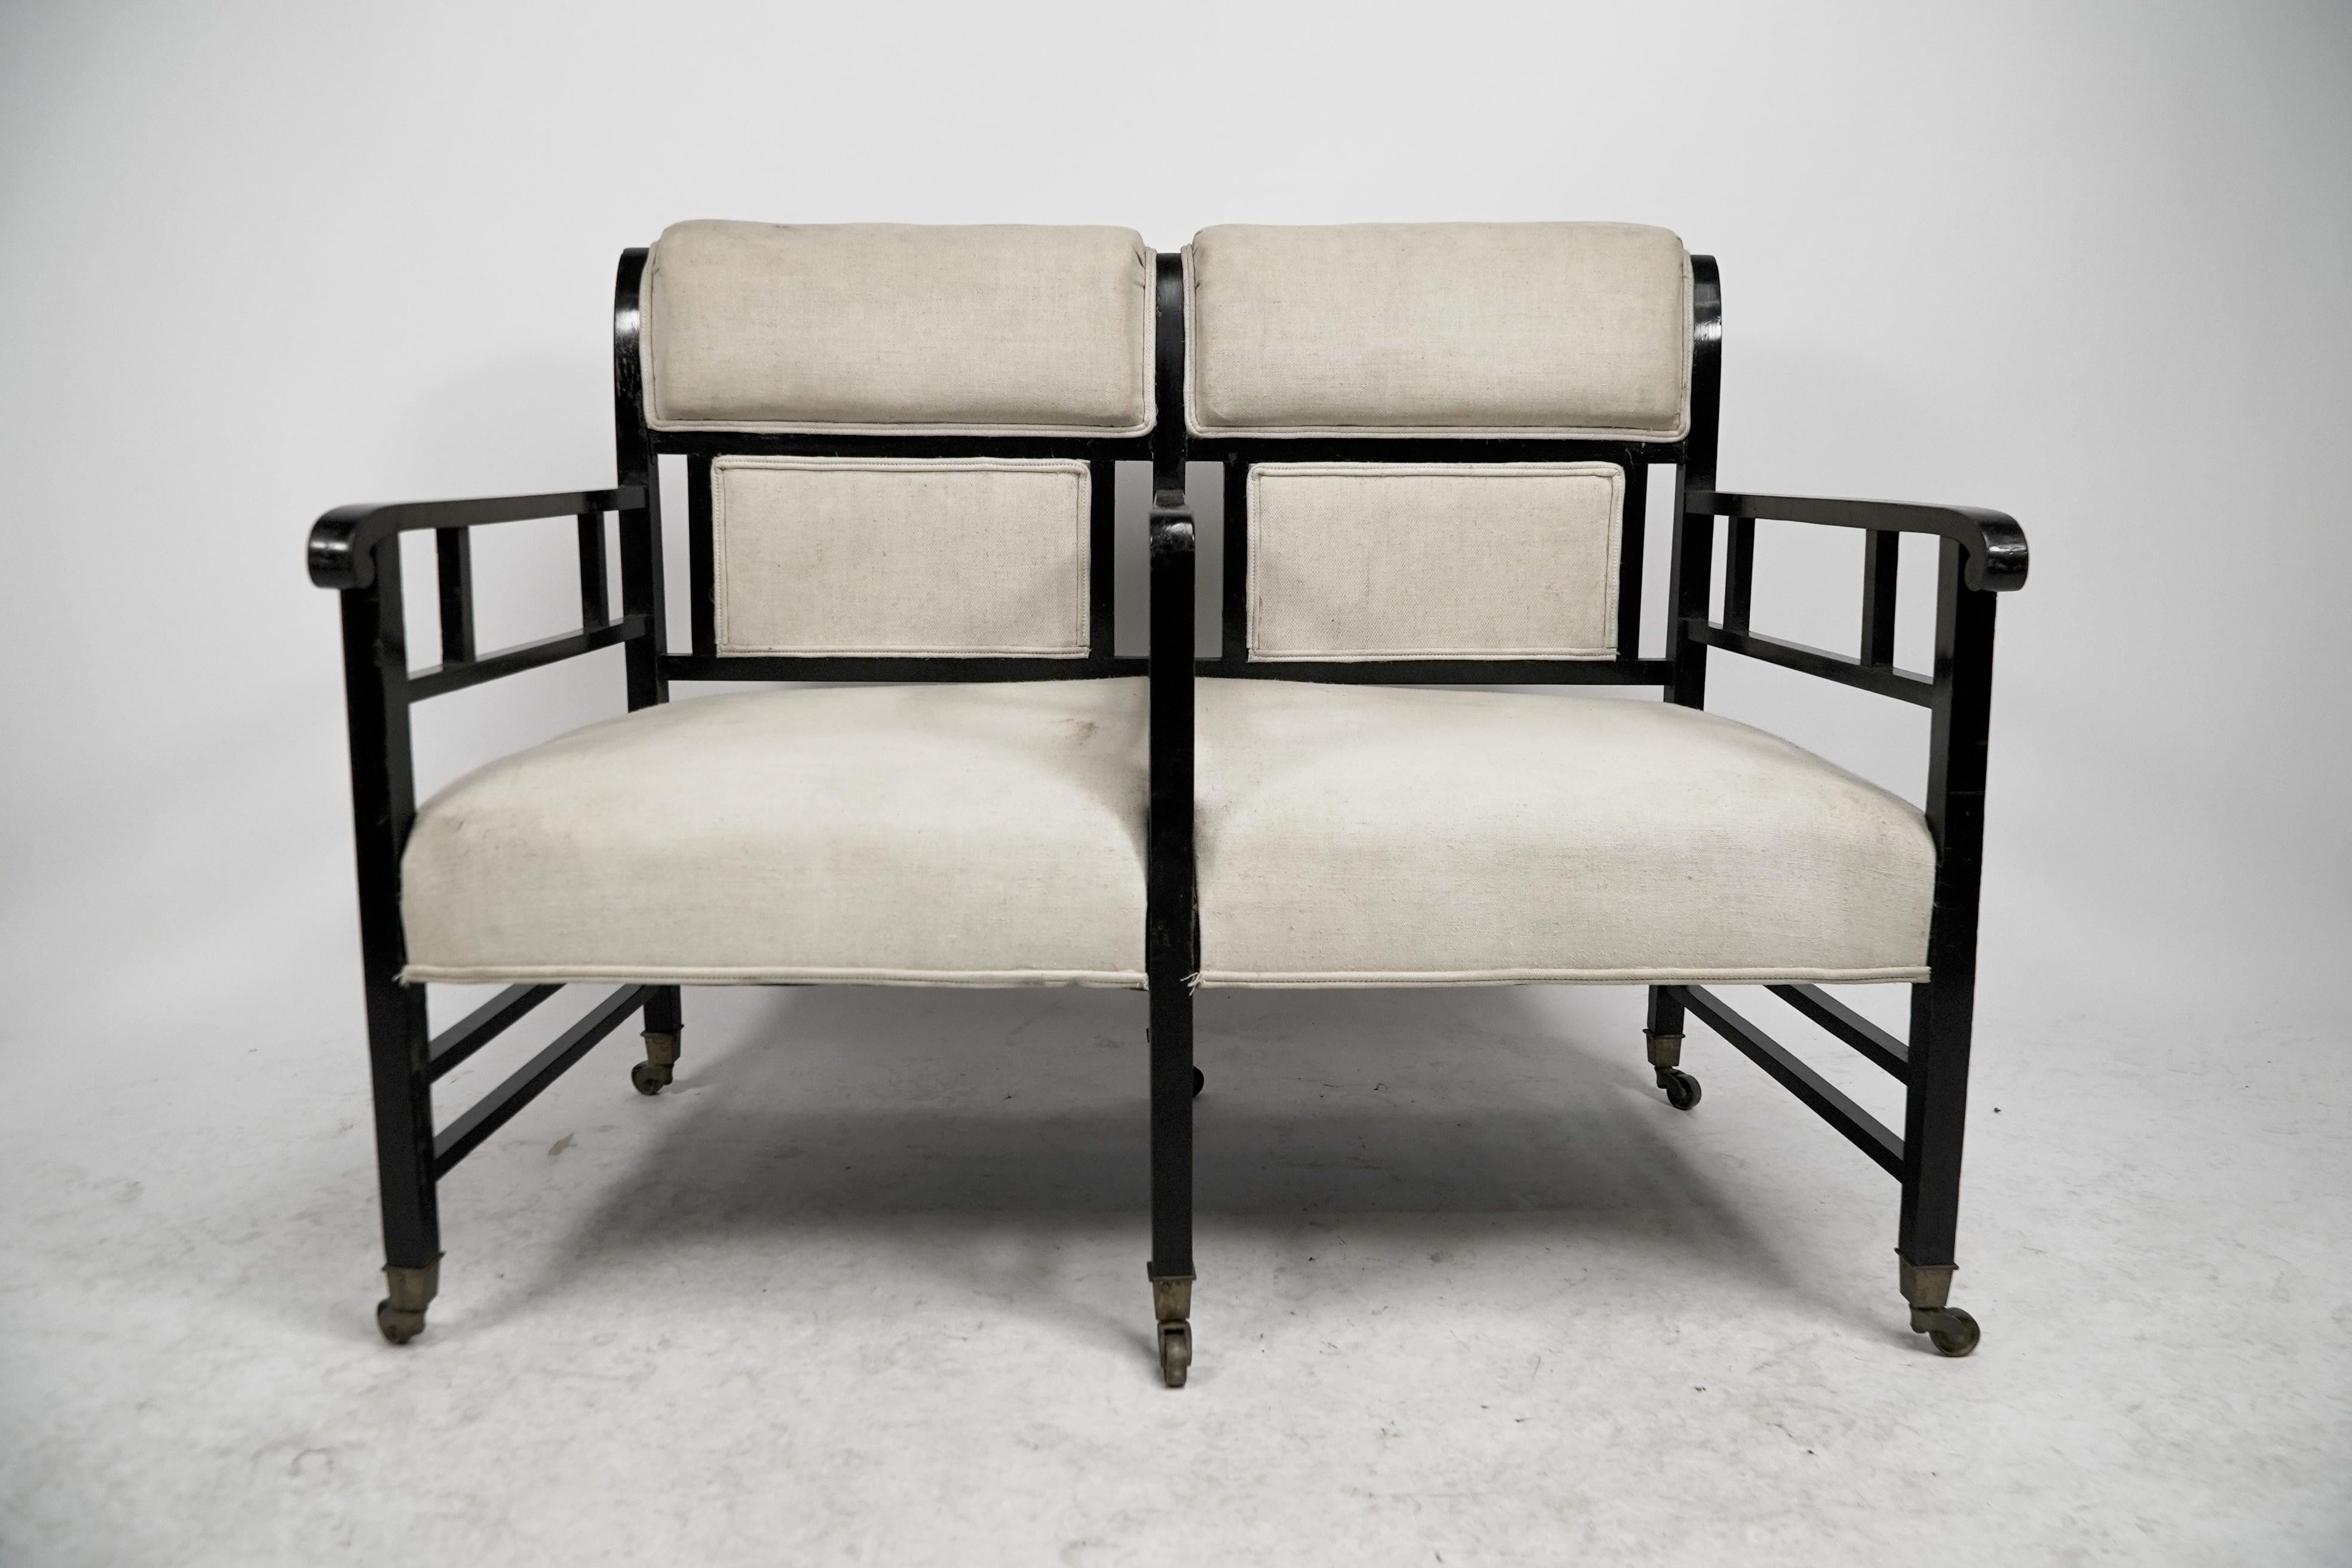 English E W Godwin (attributed). An Anglo-Japanese ebonized duet or conversation settee. For Sale